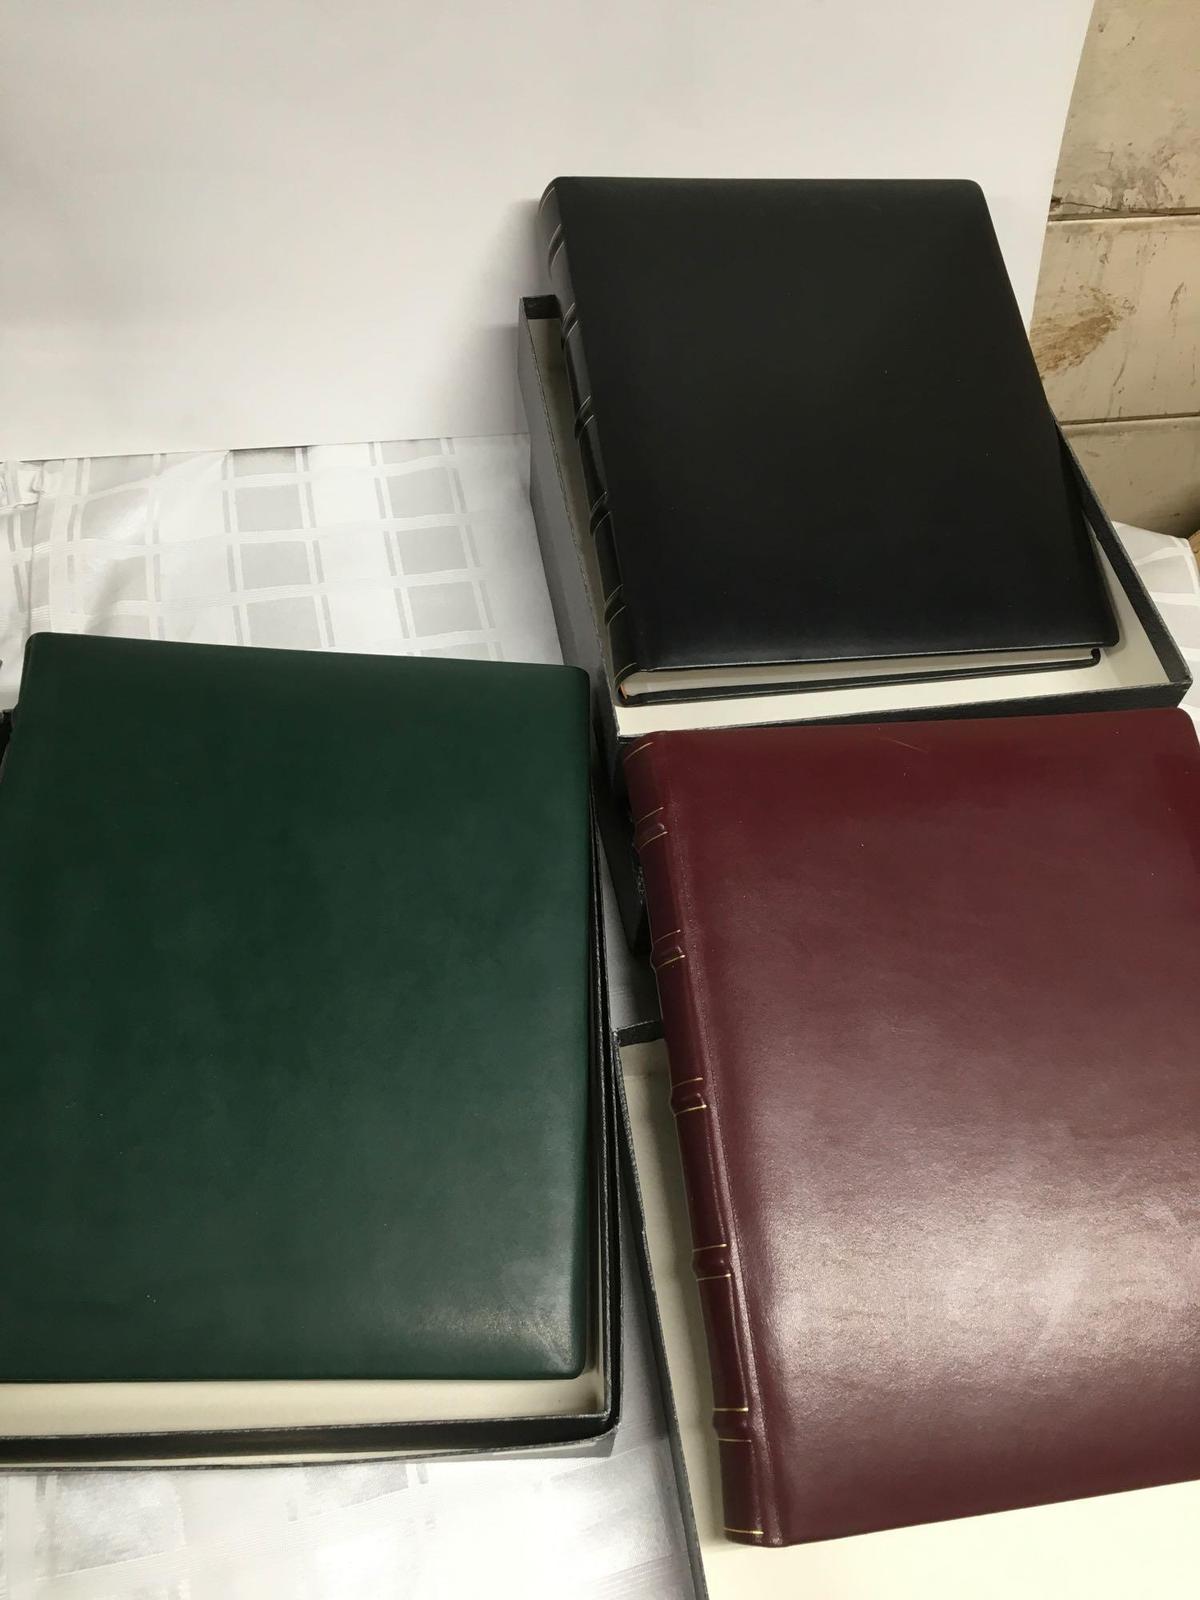 Nieman Marcus genuine calf leather made in Italy picture albums